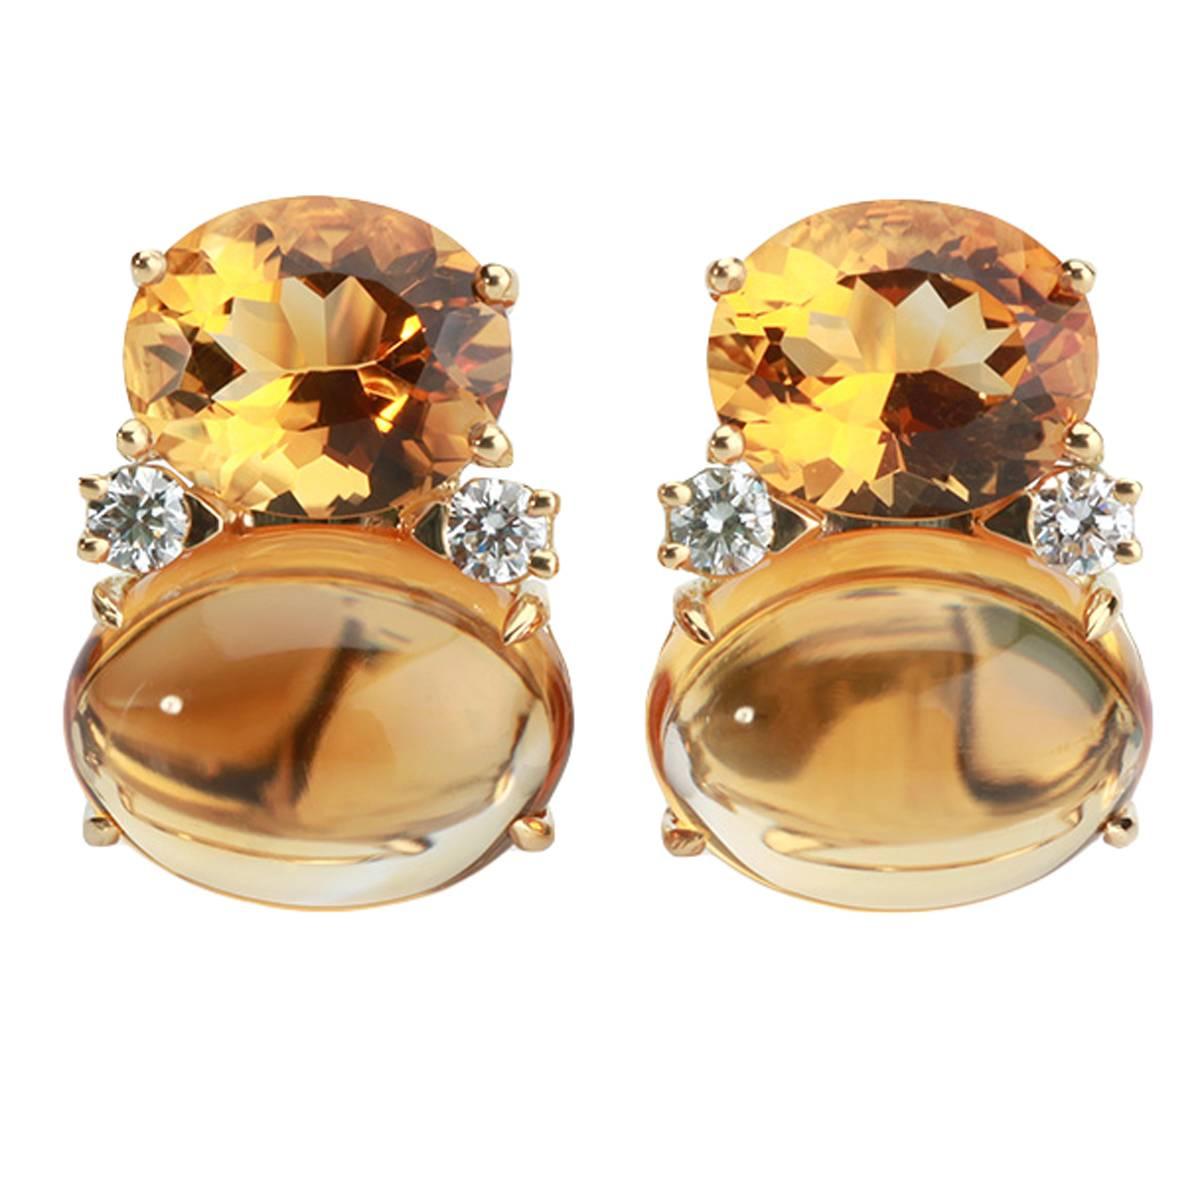 Large GUM DROP™ Earrings with Faceted Citrine and Cabochon Citrine and Diamonds